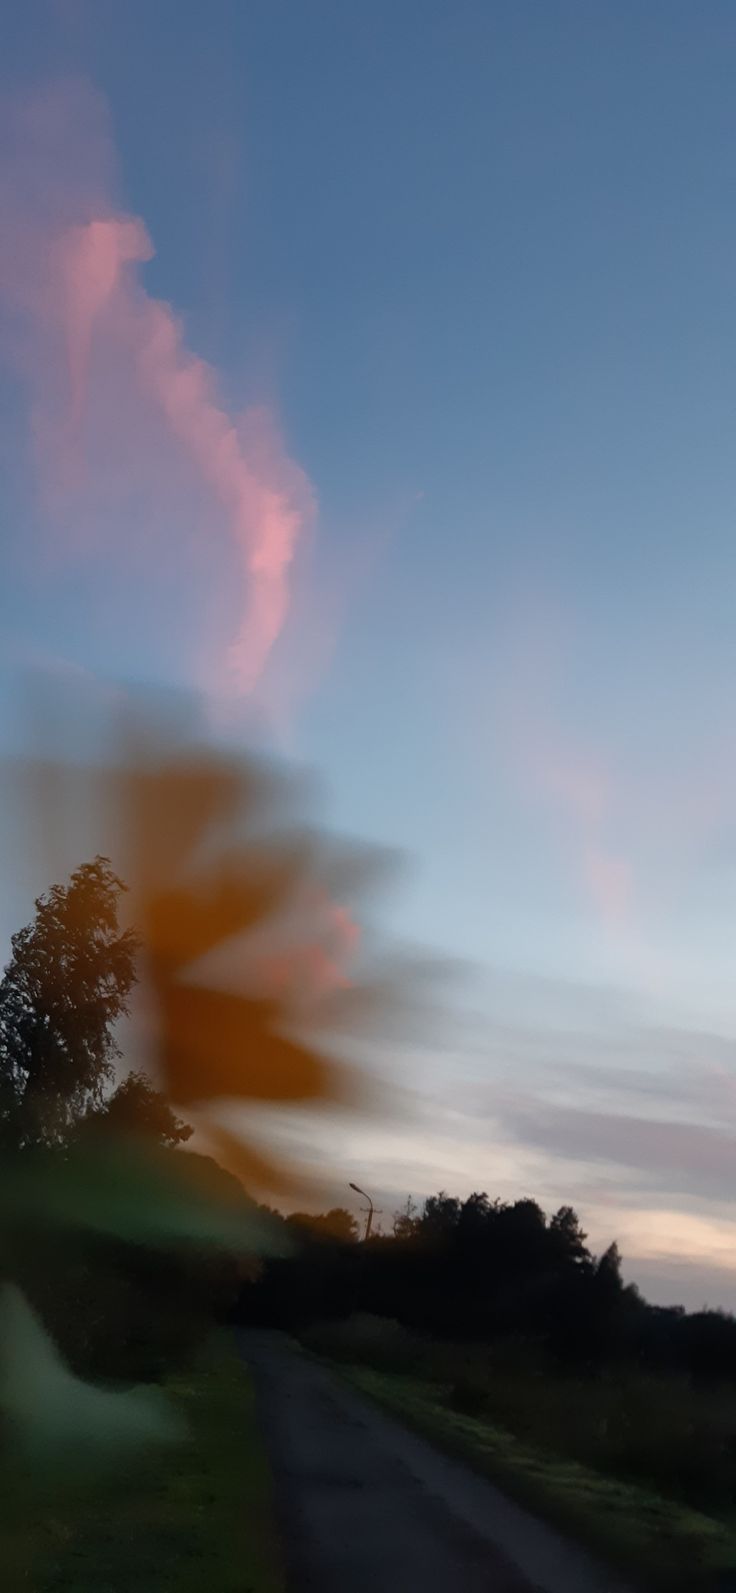 A blurry image of the sunset - Blurry